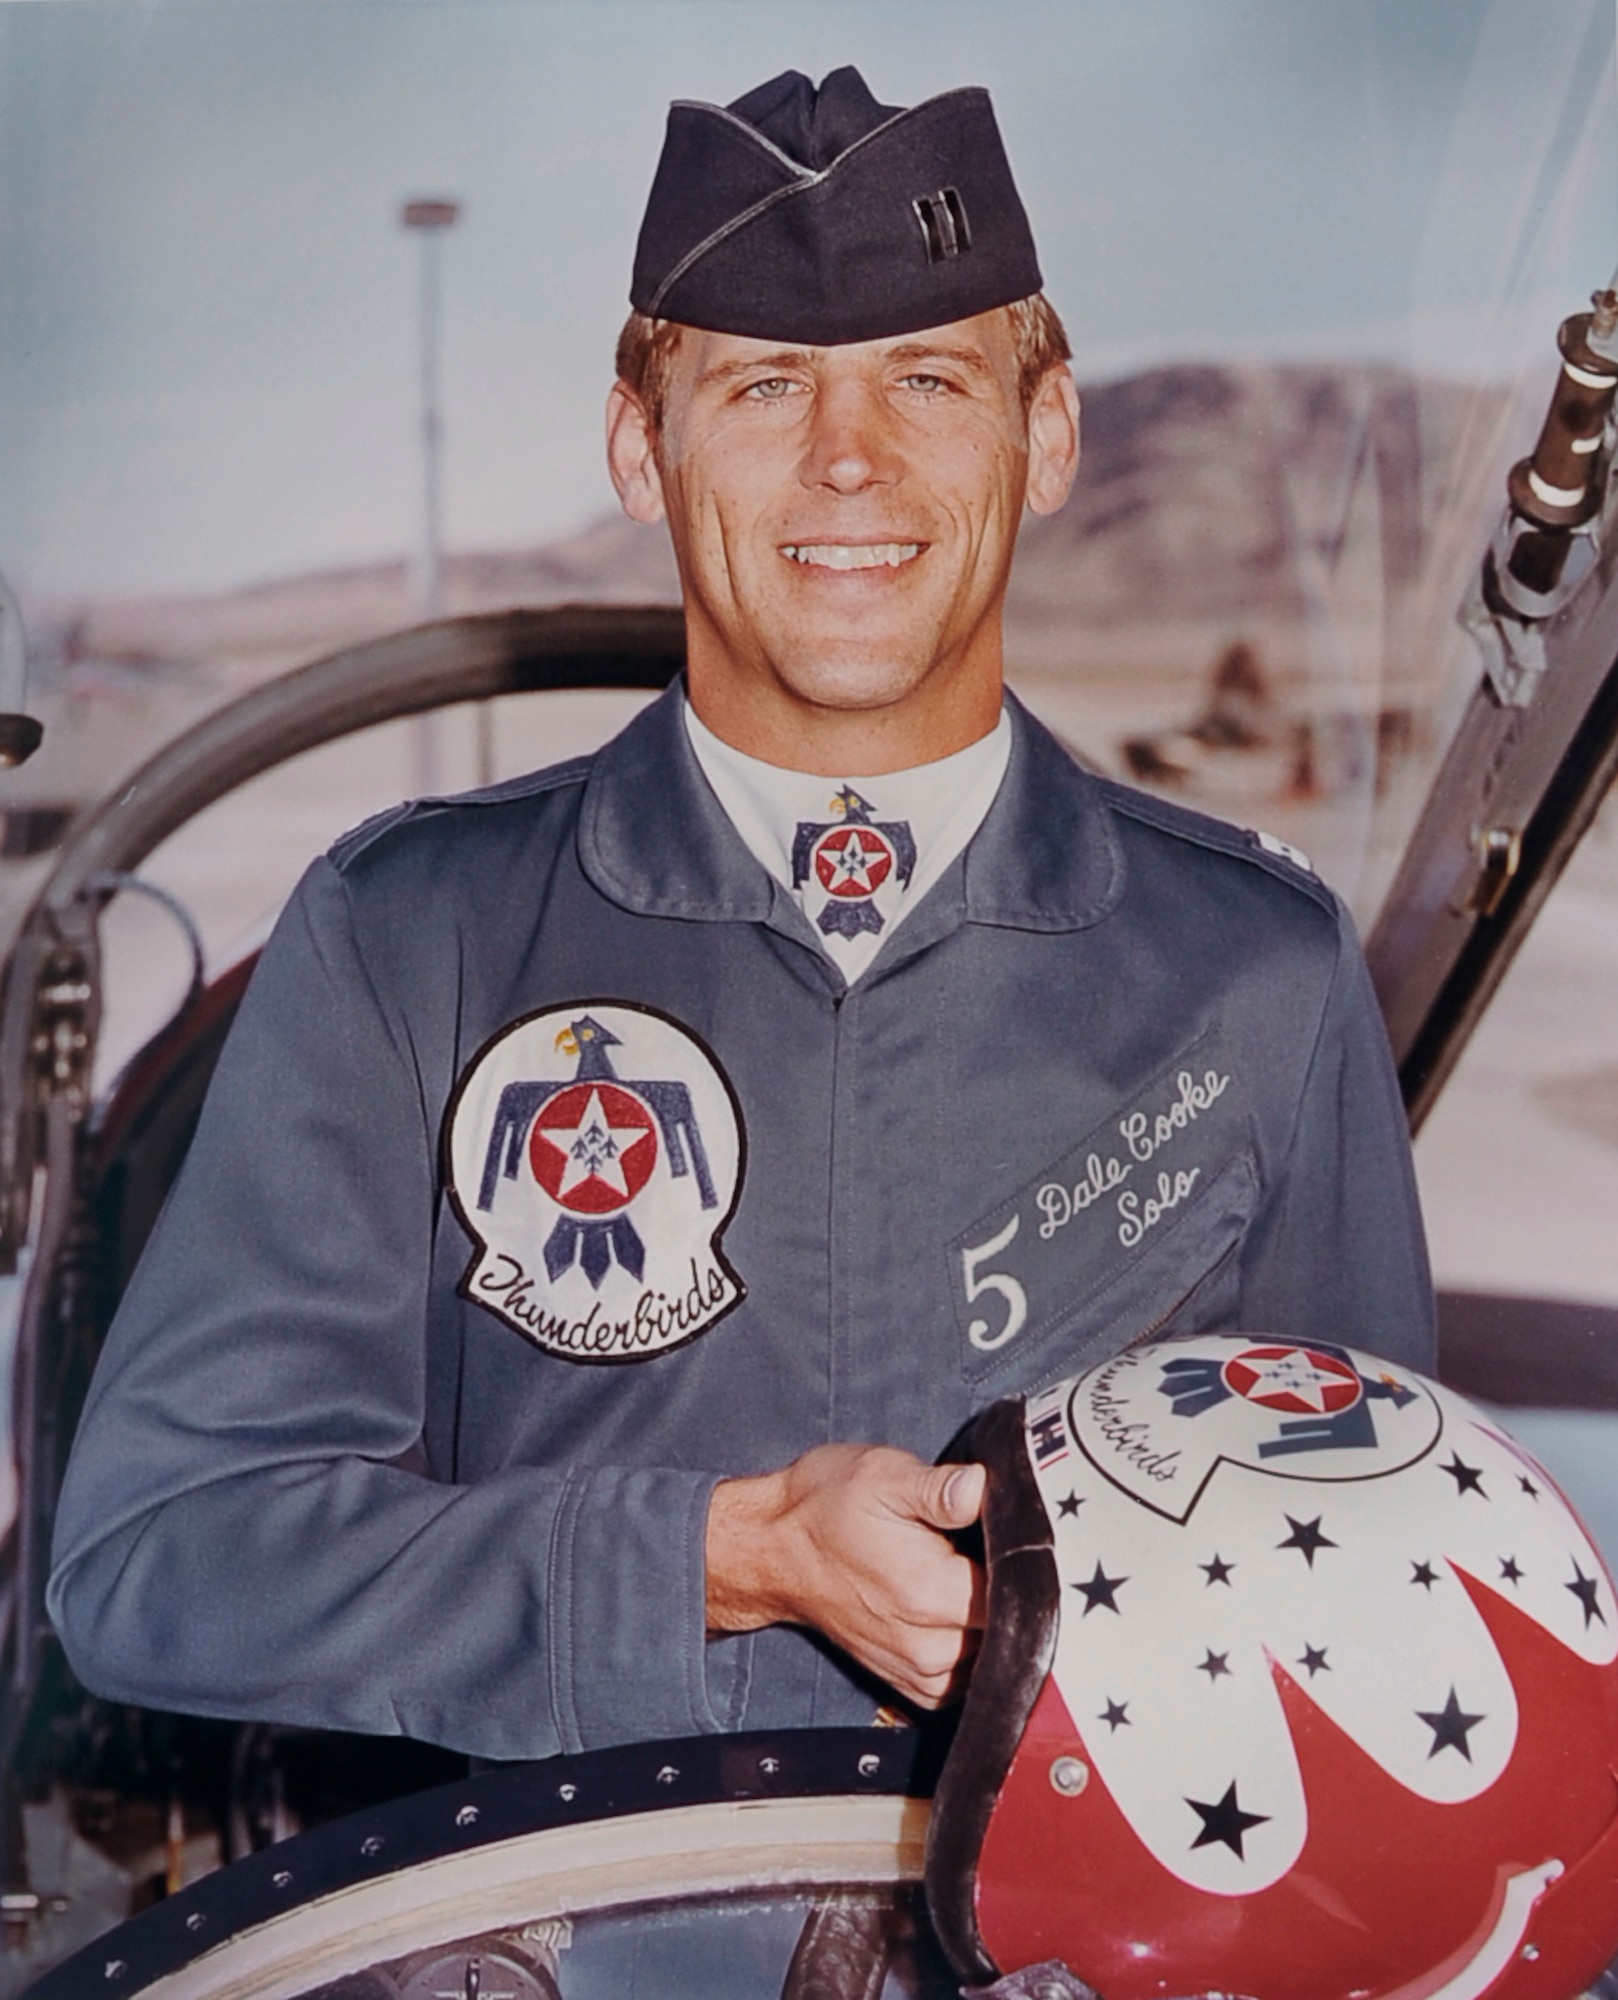 Then-Capt. Dale Cooke, a pilot with the United States Air Force Thunderbirds, poses for an official biography photo in 1982. (Courtesy photo)